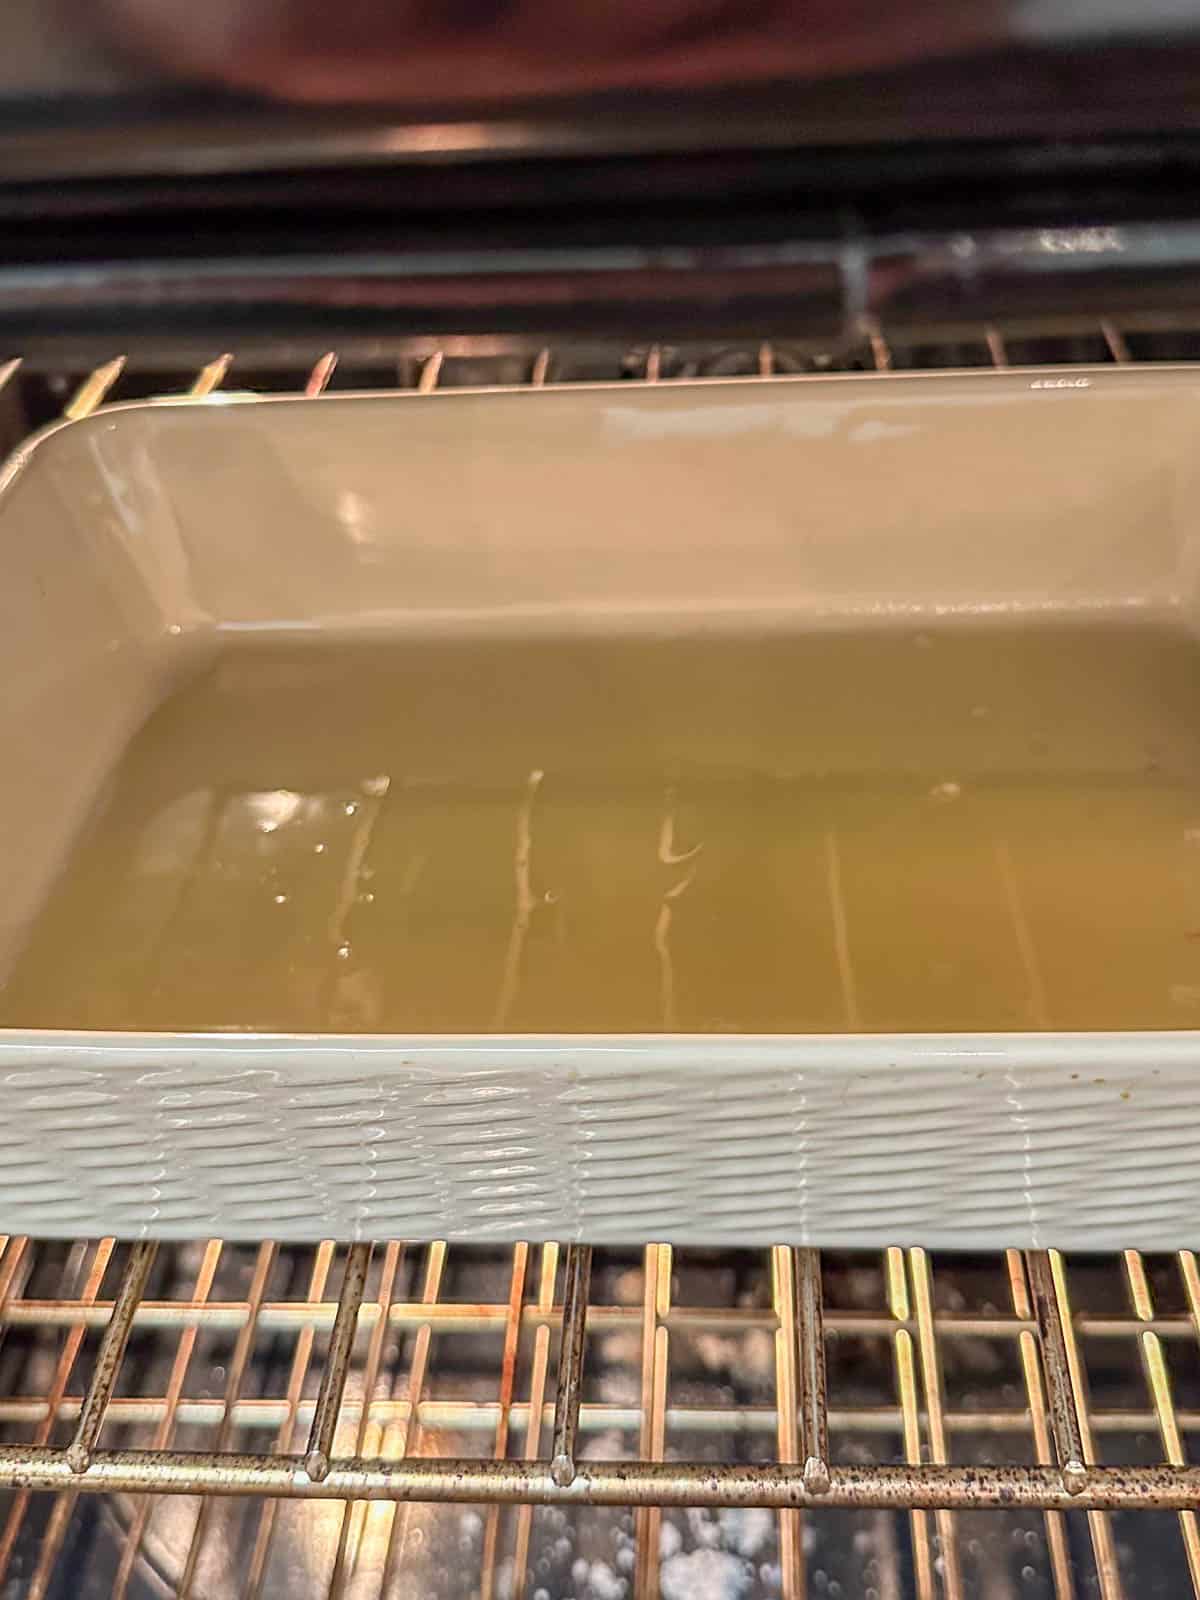 A dish containing chicken fat heating in an oven.